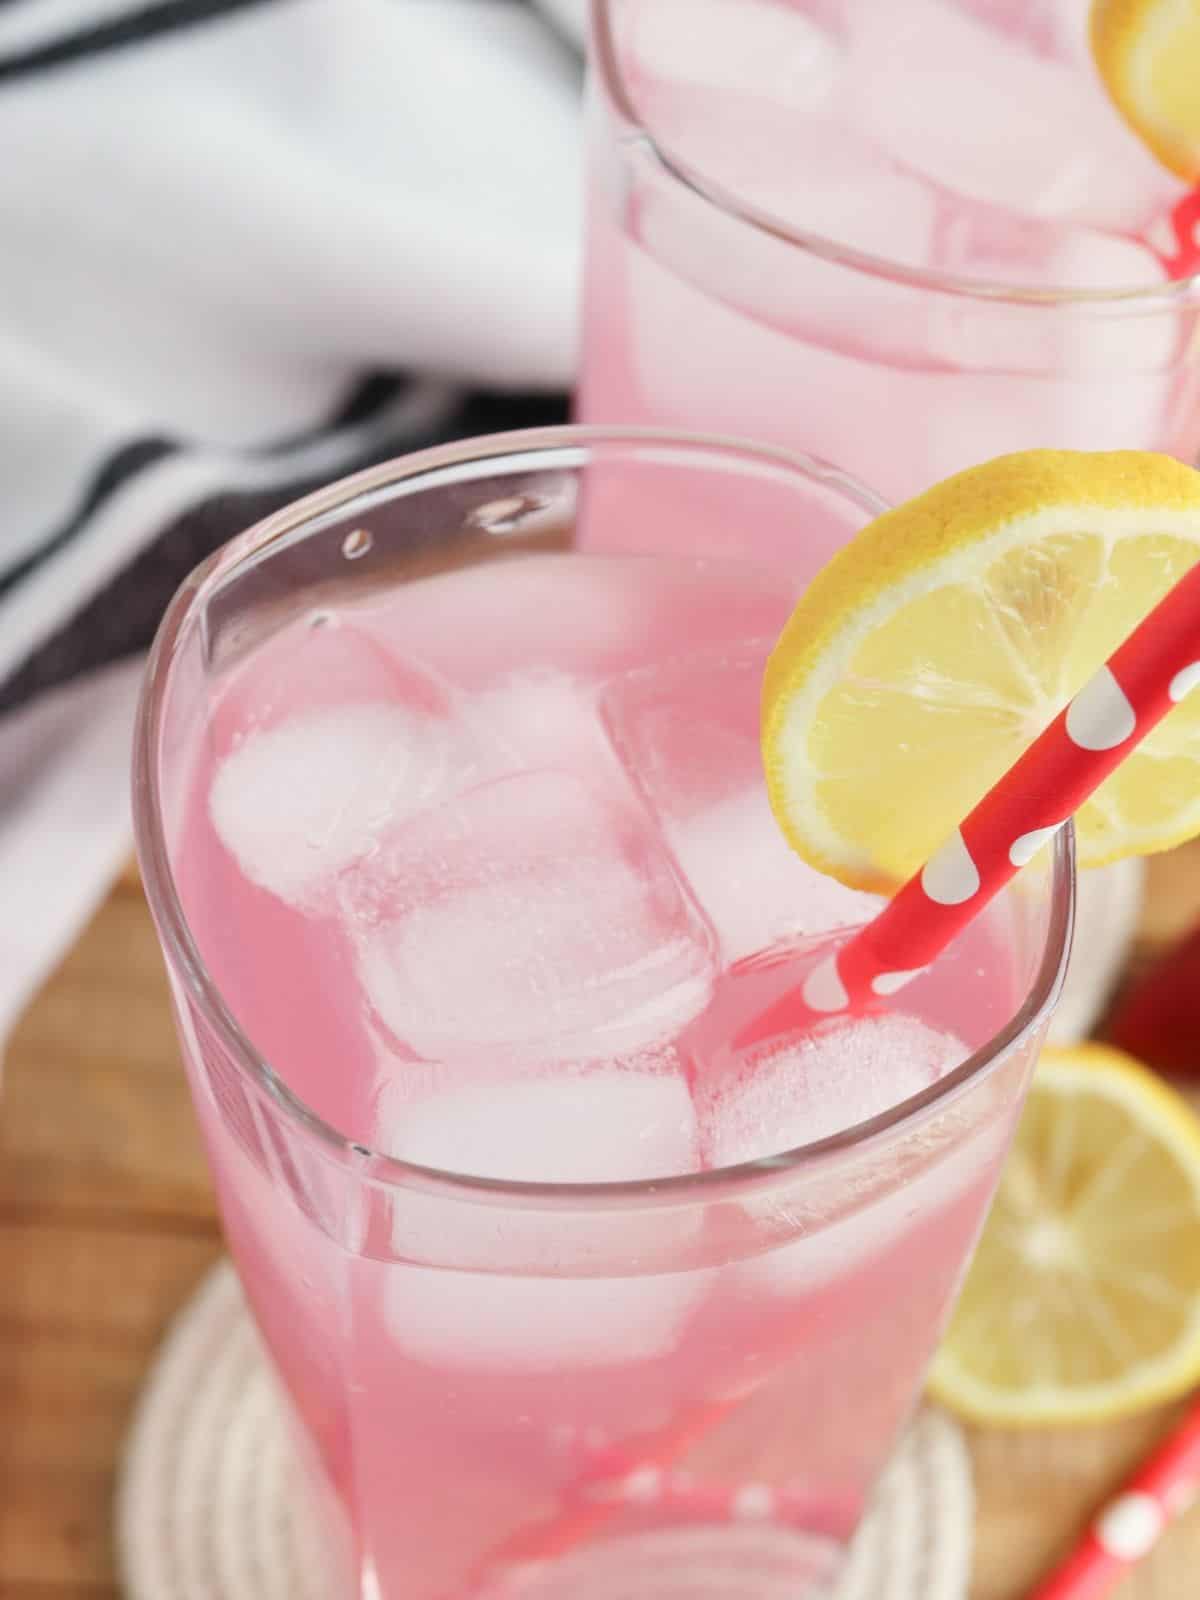 Overhead view of lemonade in glass with ice cubes, lemon slices and straw.